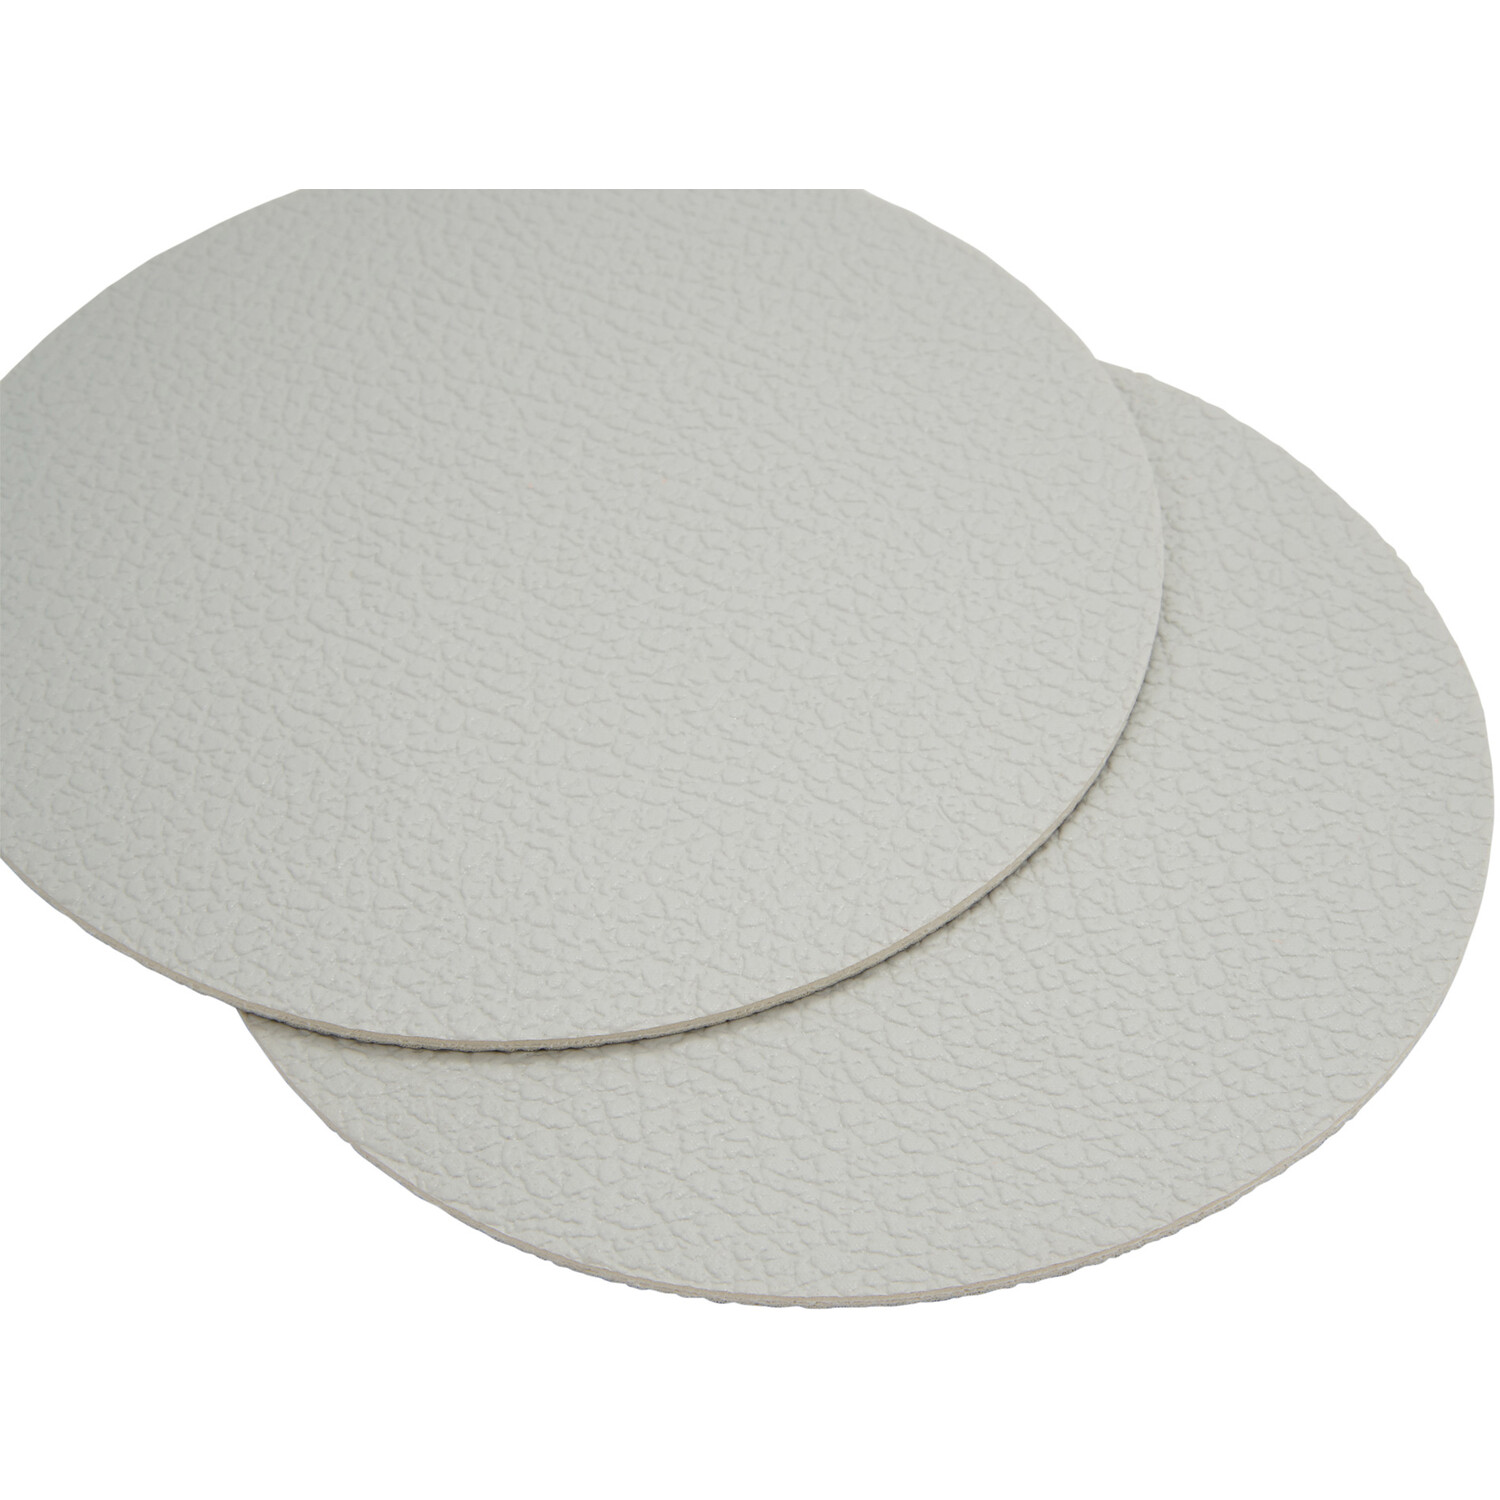 Set of 4 Round Fusion Faux Leather Coasters - Grey Image 5